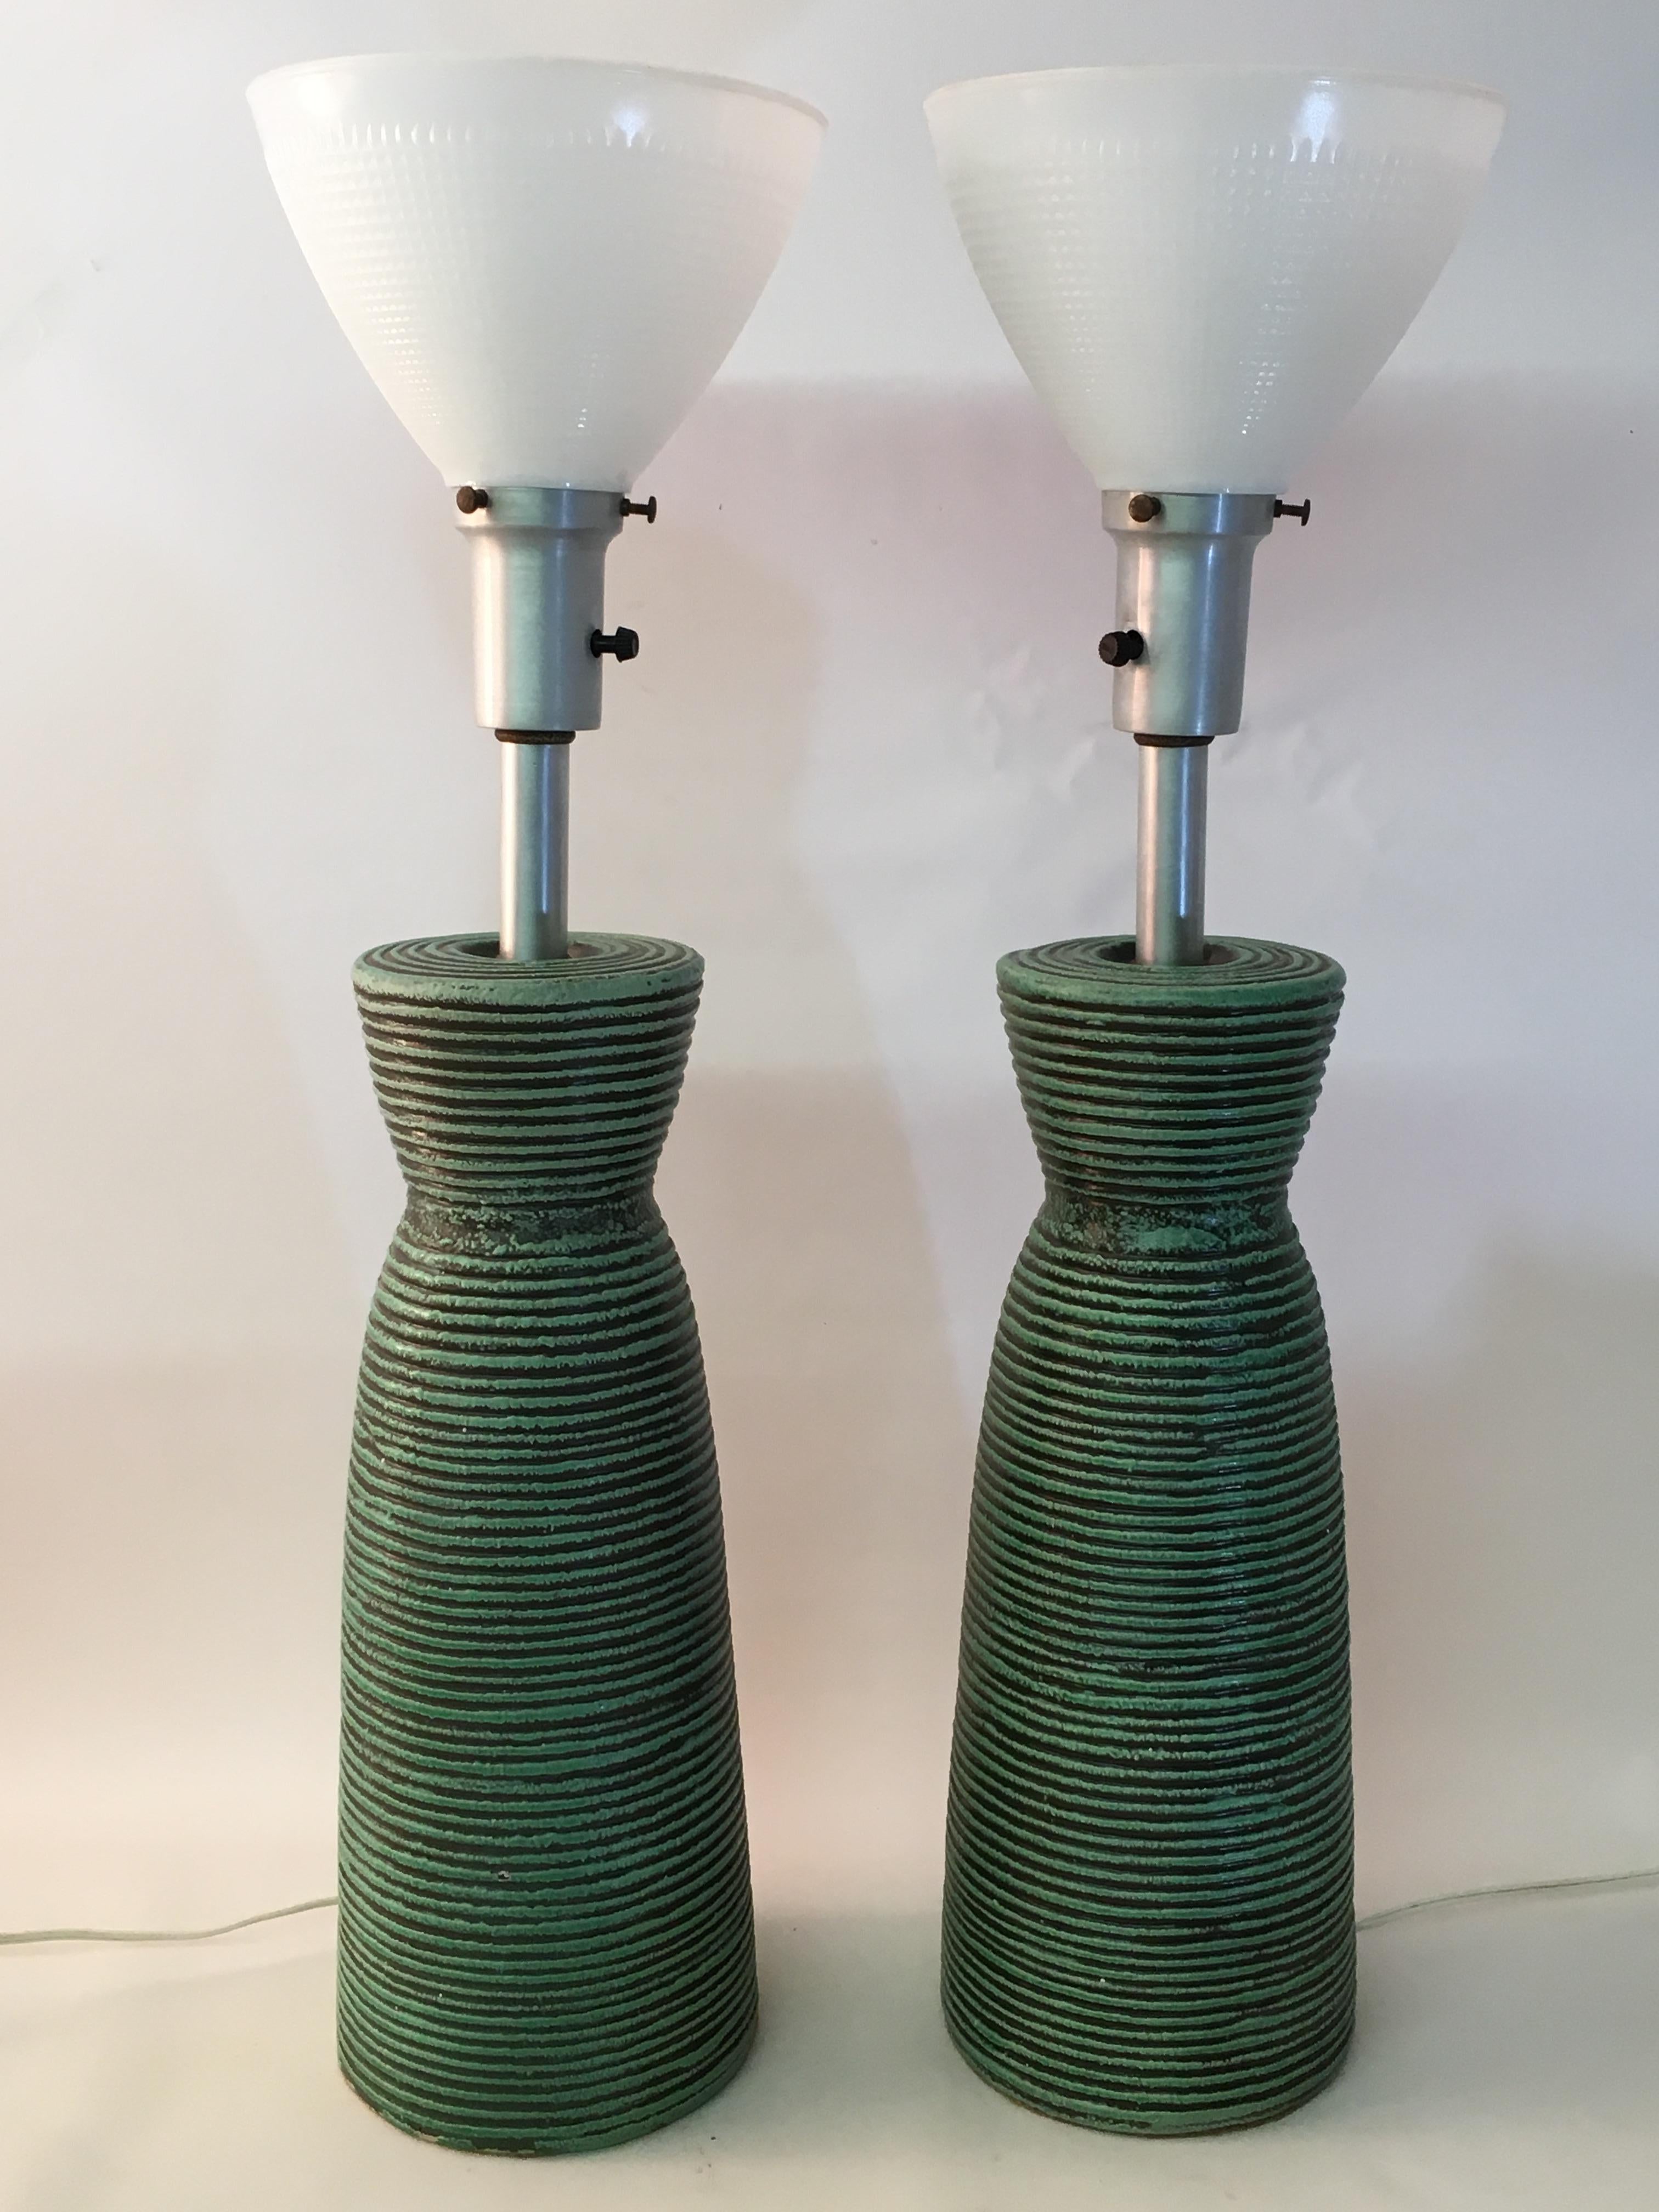 Cast ceramic ribbed and signed Kelby table lamps. Aluminum bulb sockets with white glass diffusers. Tactile raised decoration that ranges from a lighter turquoise/mint green to black glaze, circa 1950. Good working condition. 

Ceramic body